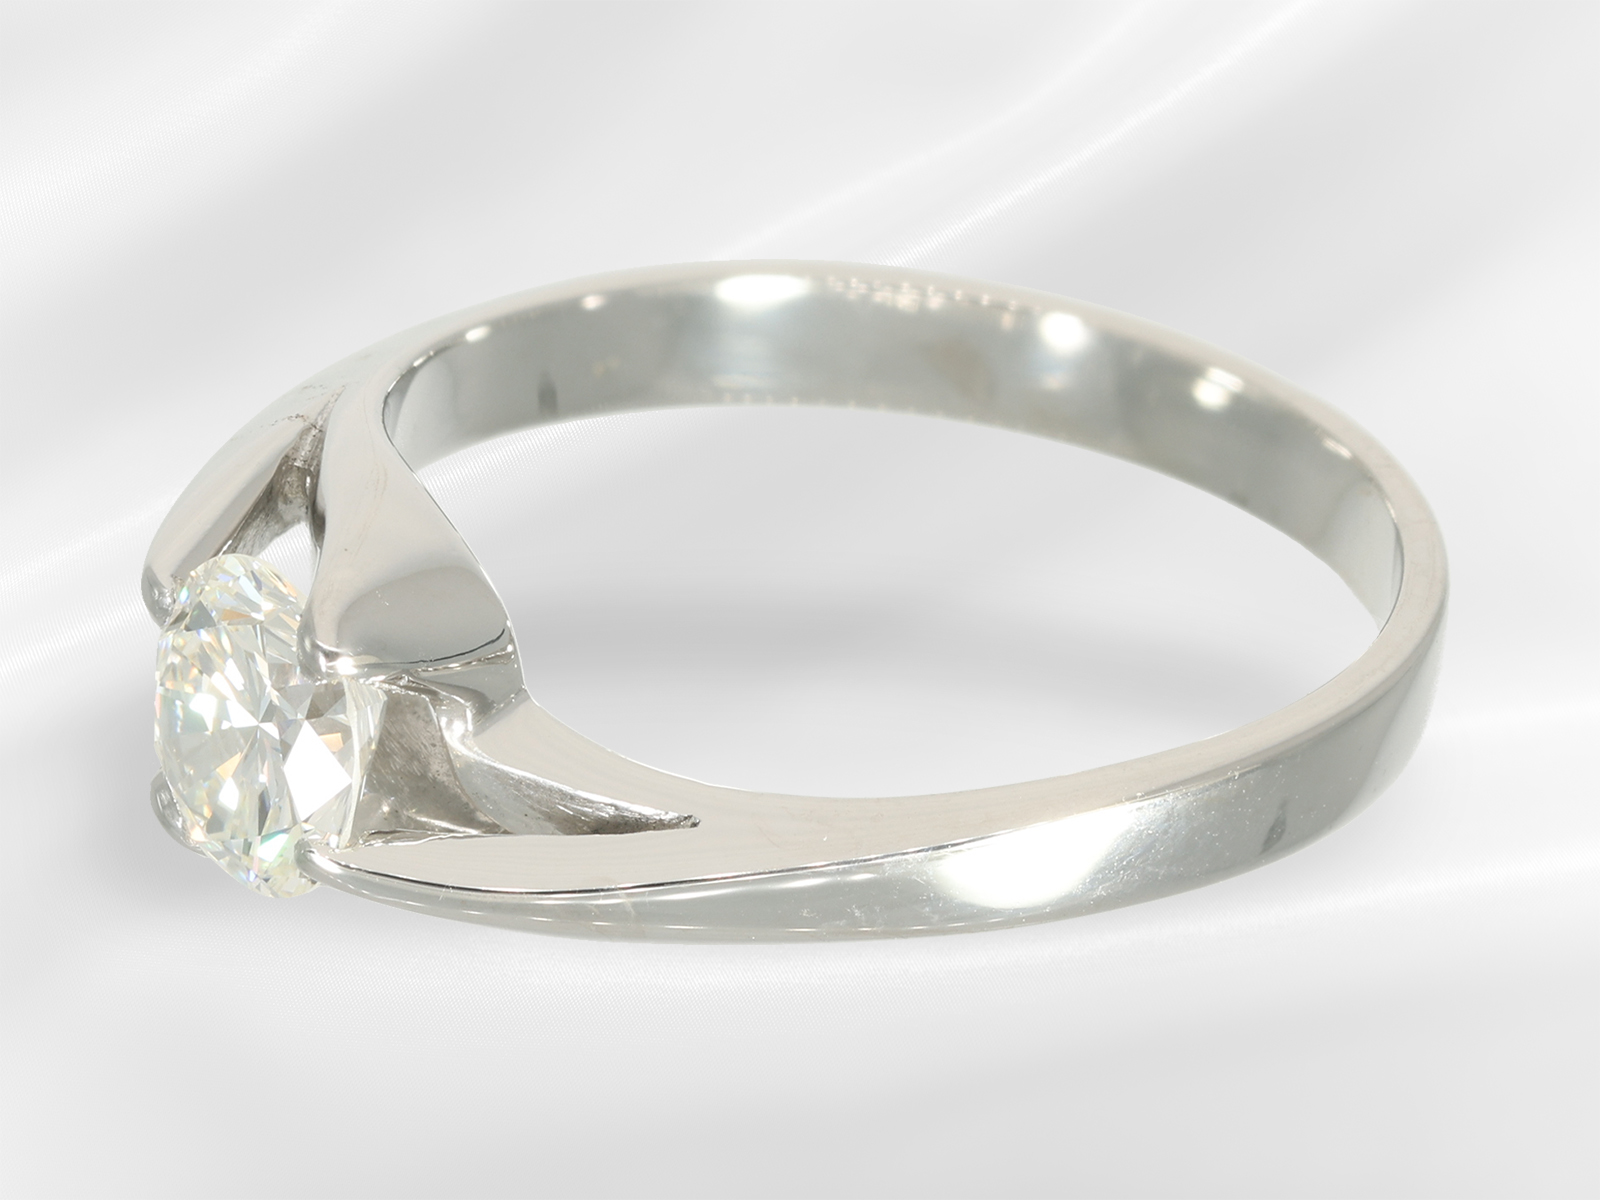 Ring: high-quality solitaire ring from Wempe, brilliant-cut diamond in top quality, flawless, 0.75ct - Image 2 of 4